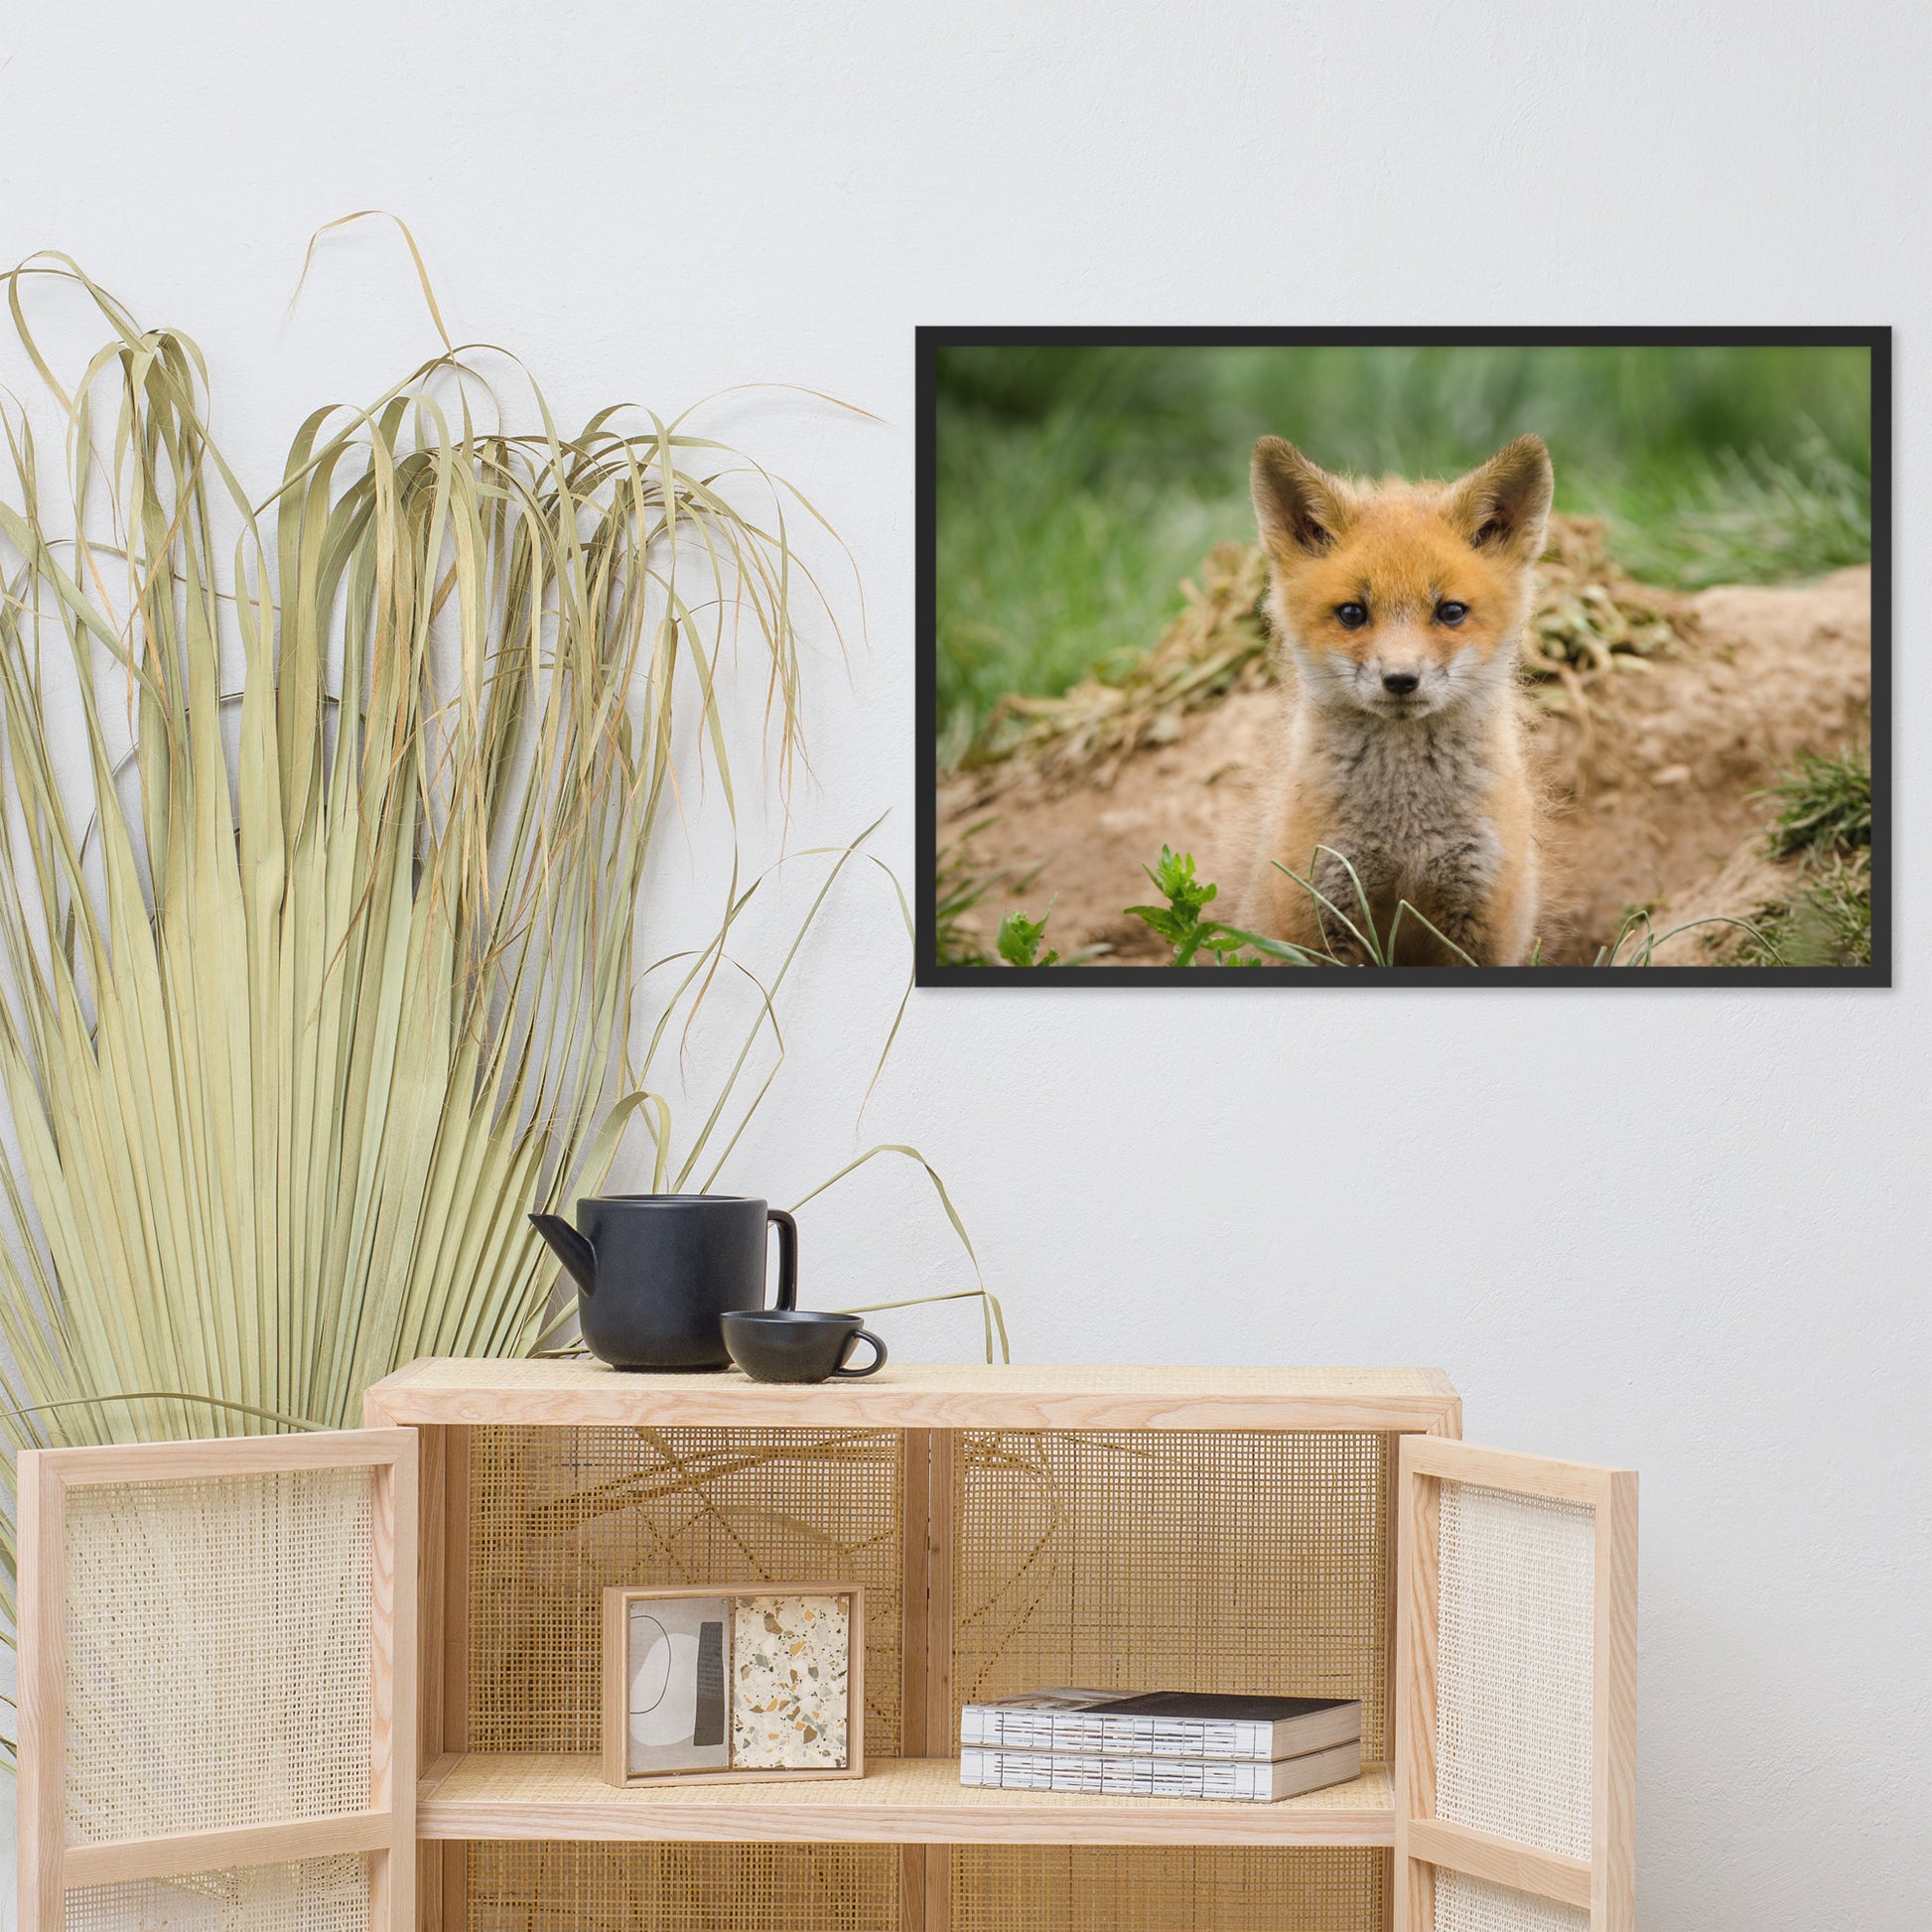 Prints For A Bathroom Wall: Baby Young Red Fox Kit/ Animal / Wildlife / Nature Photographic Artwork - Framed Artwork - Wall Decor